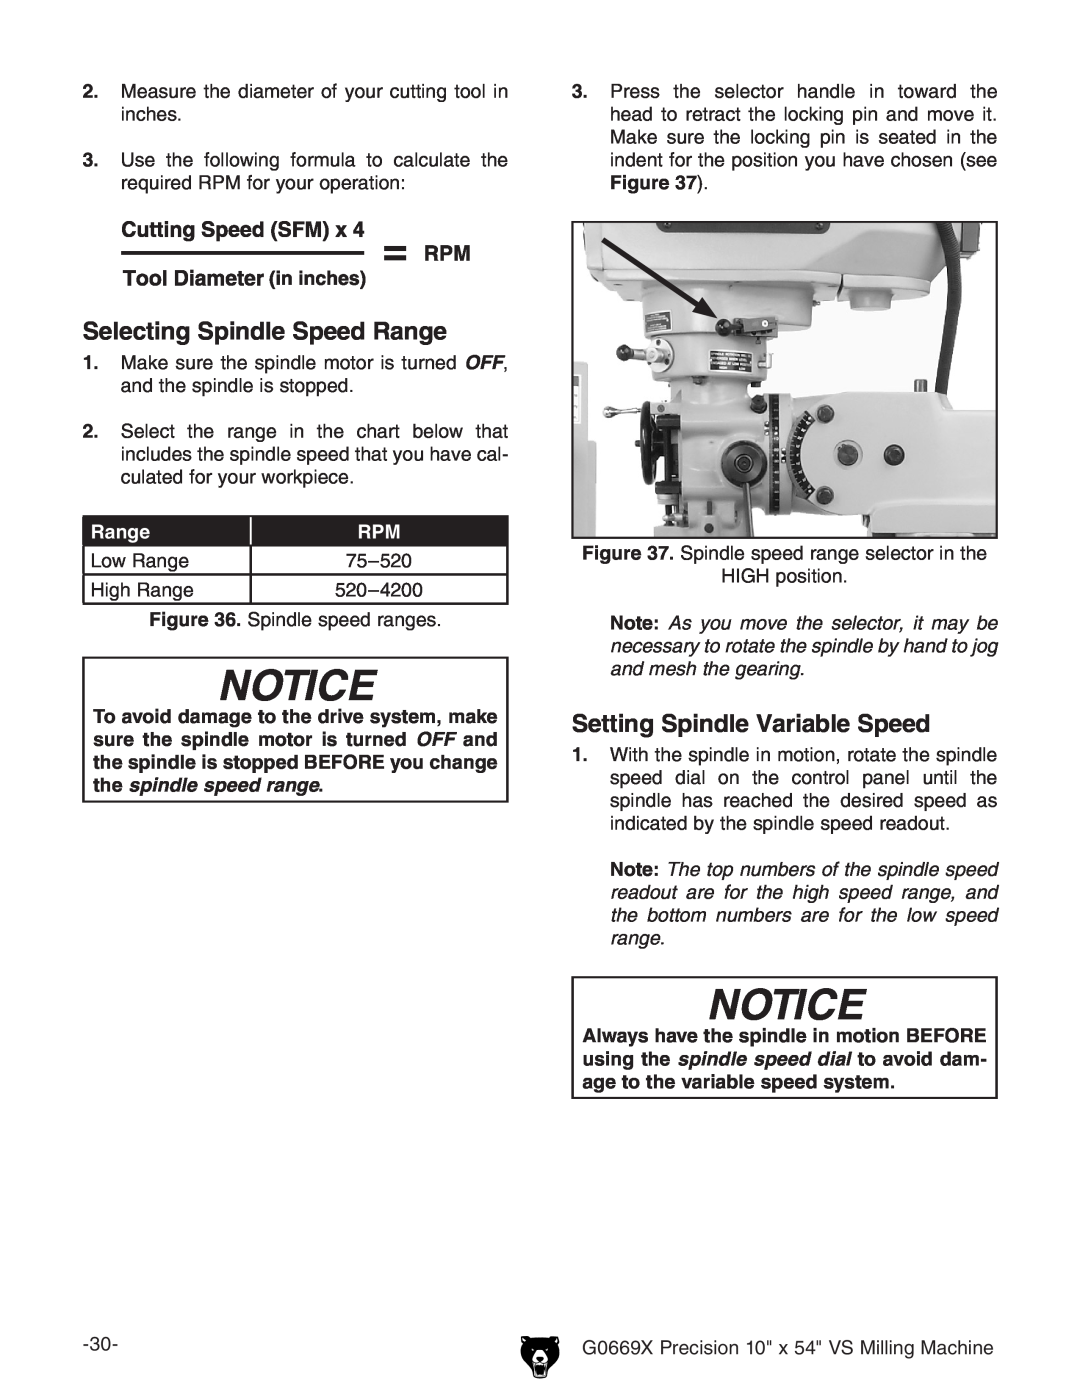 Grizzly g0669X owner manual Selecting Spindle Speed Range, Setting Spindle Variable Speed 